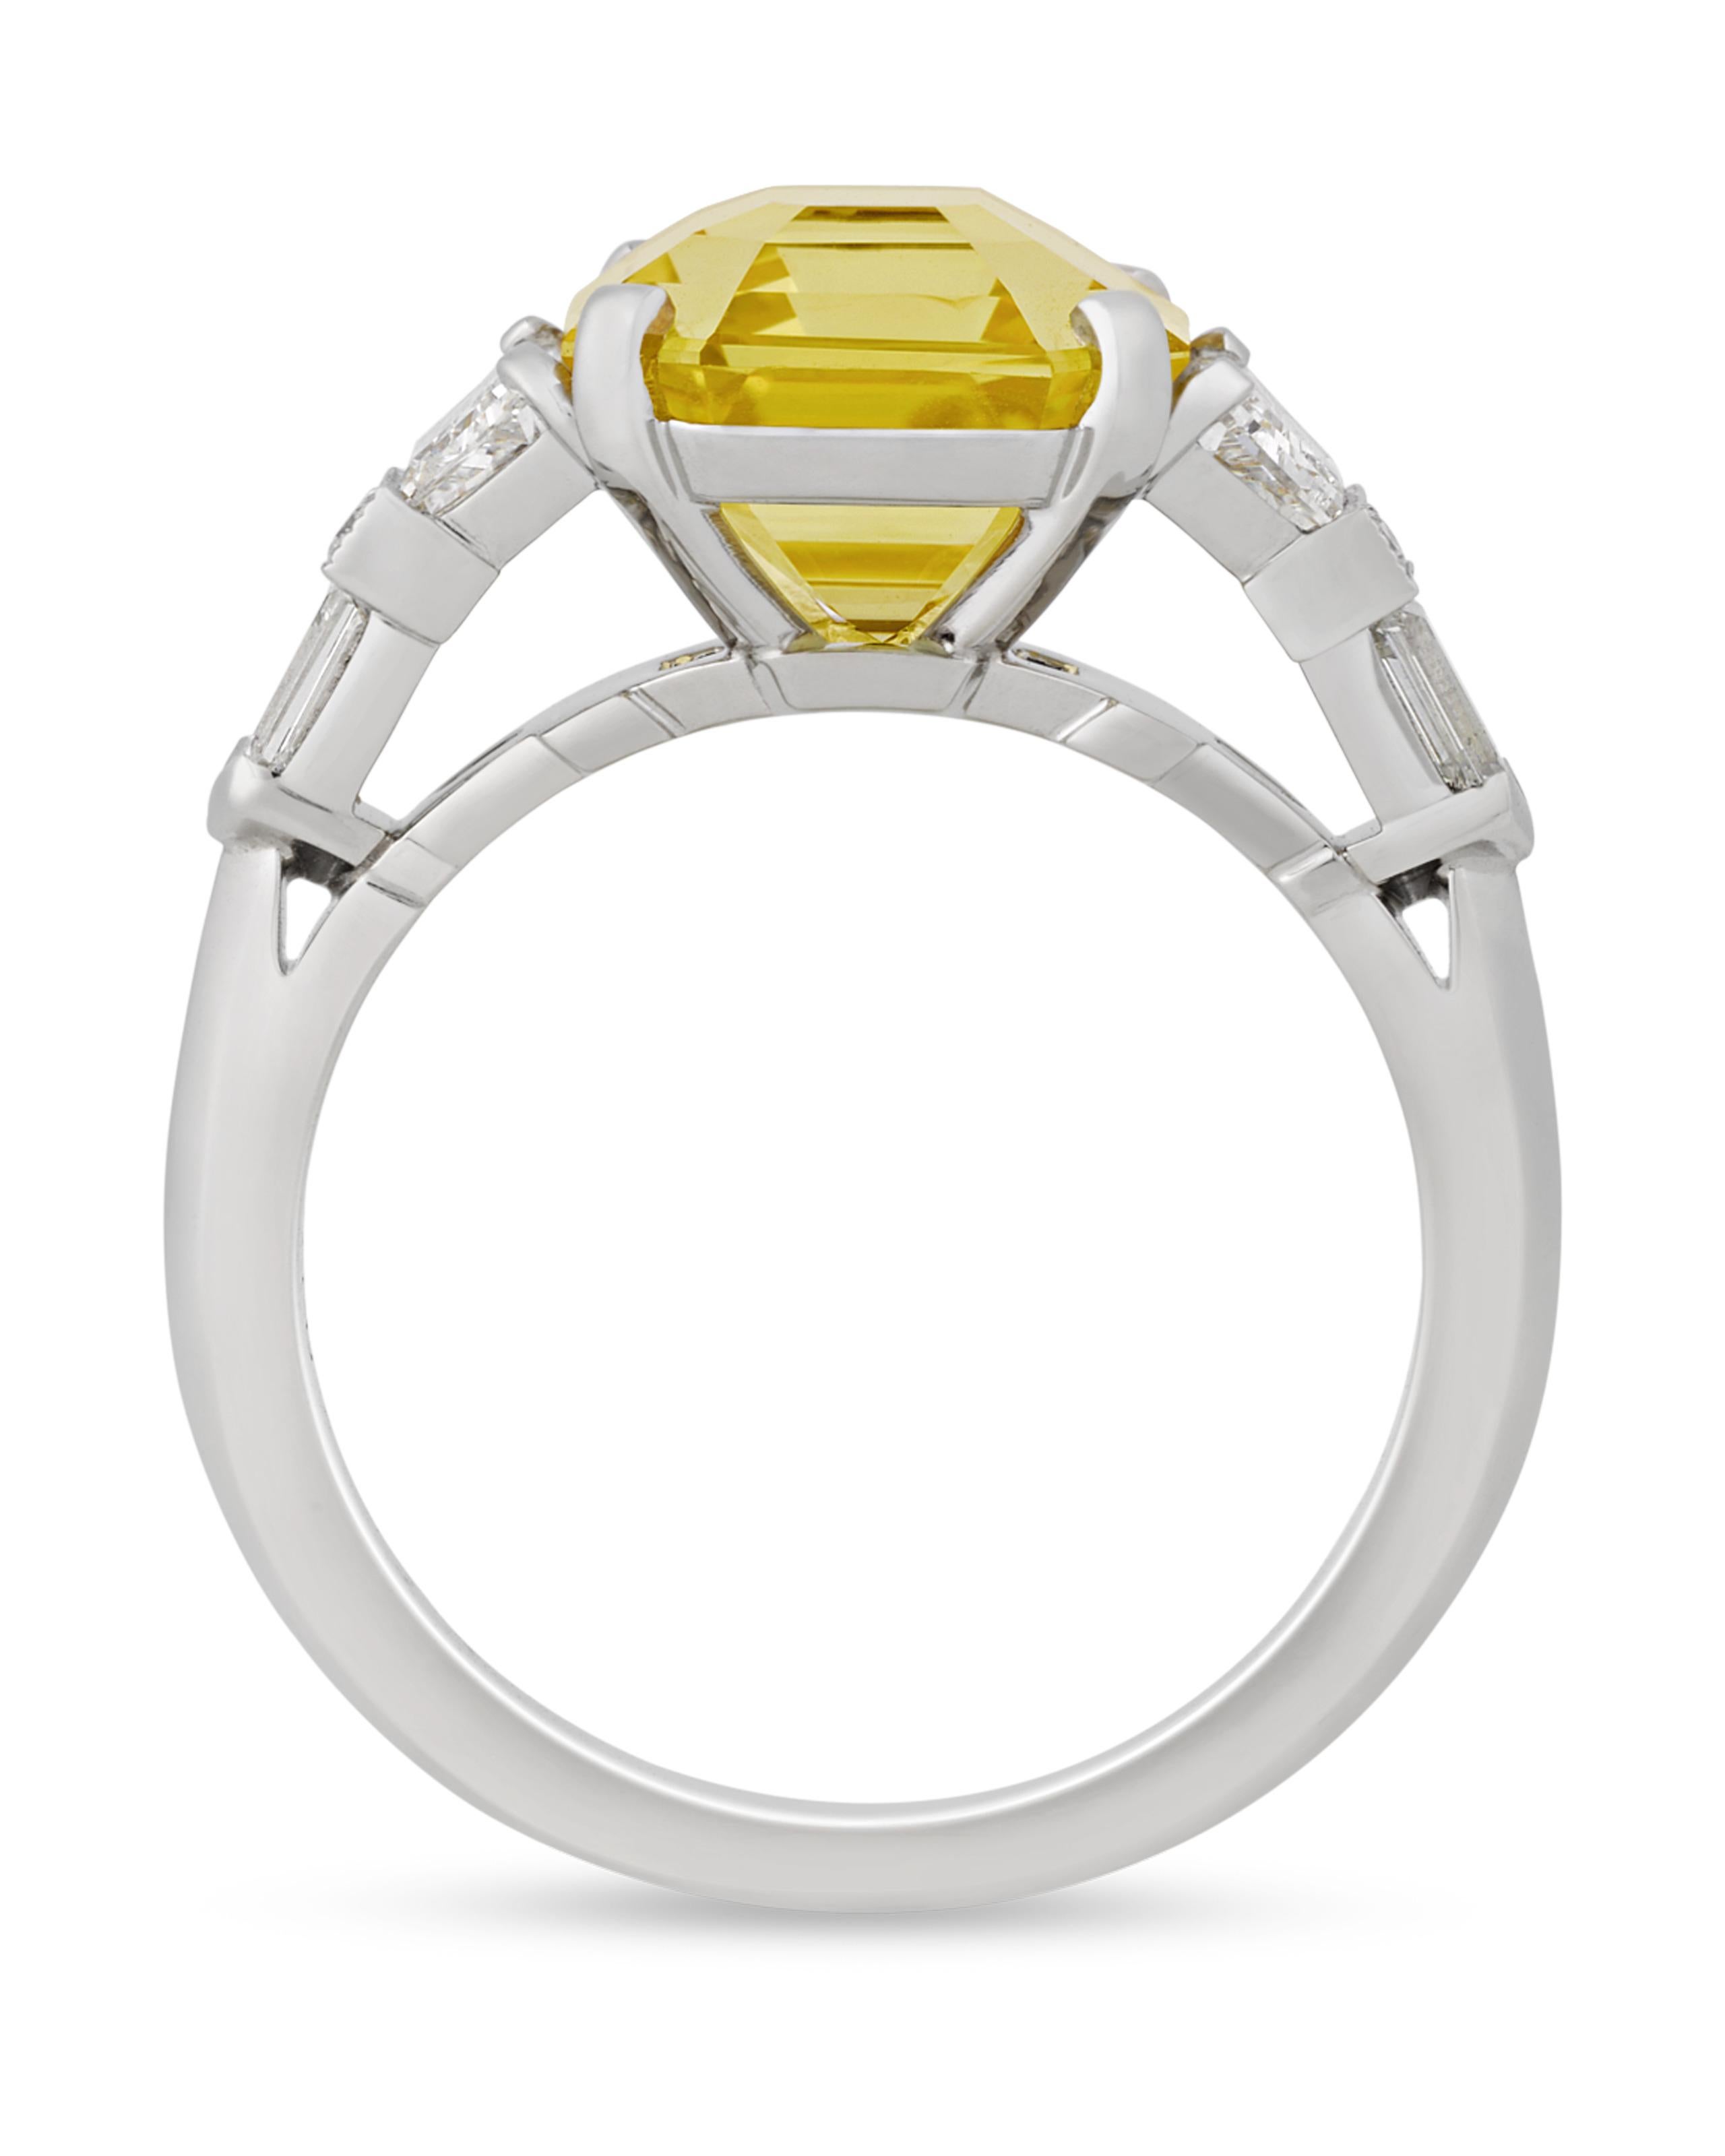 This classic ring features a fancy yellow Ceylon sapphire, one of the rarest of all fancy-colored sapphires. Weighing an impressive 5.09 carats, the octagonal step-cut jewel displays a superb yellow hue and is certified by the Gemological Institute